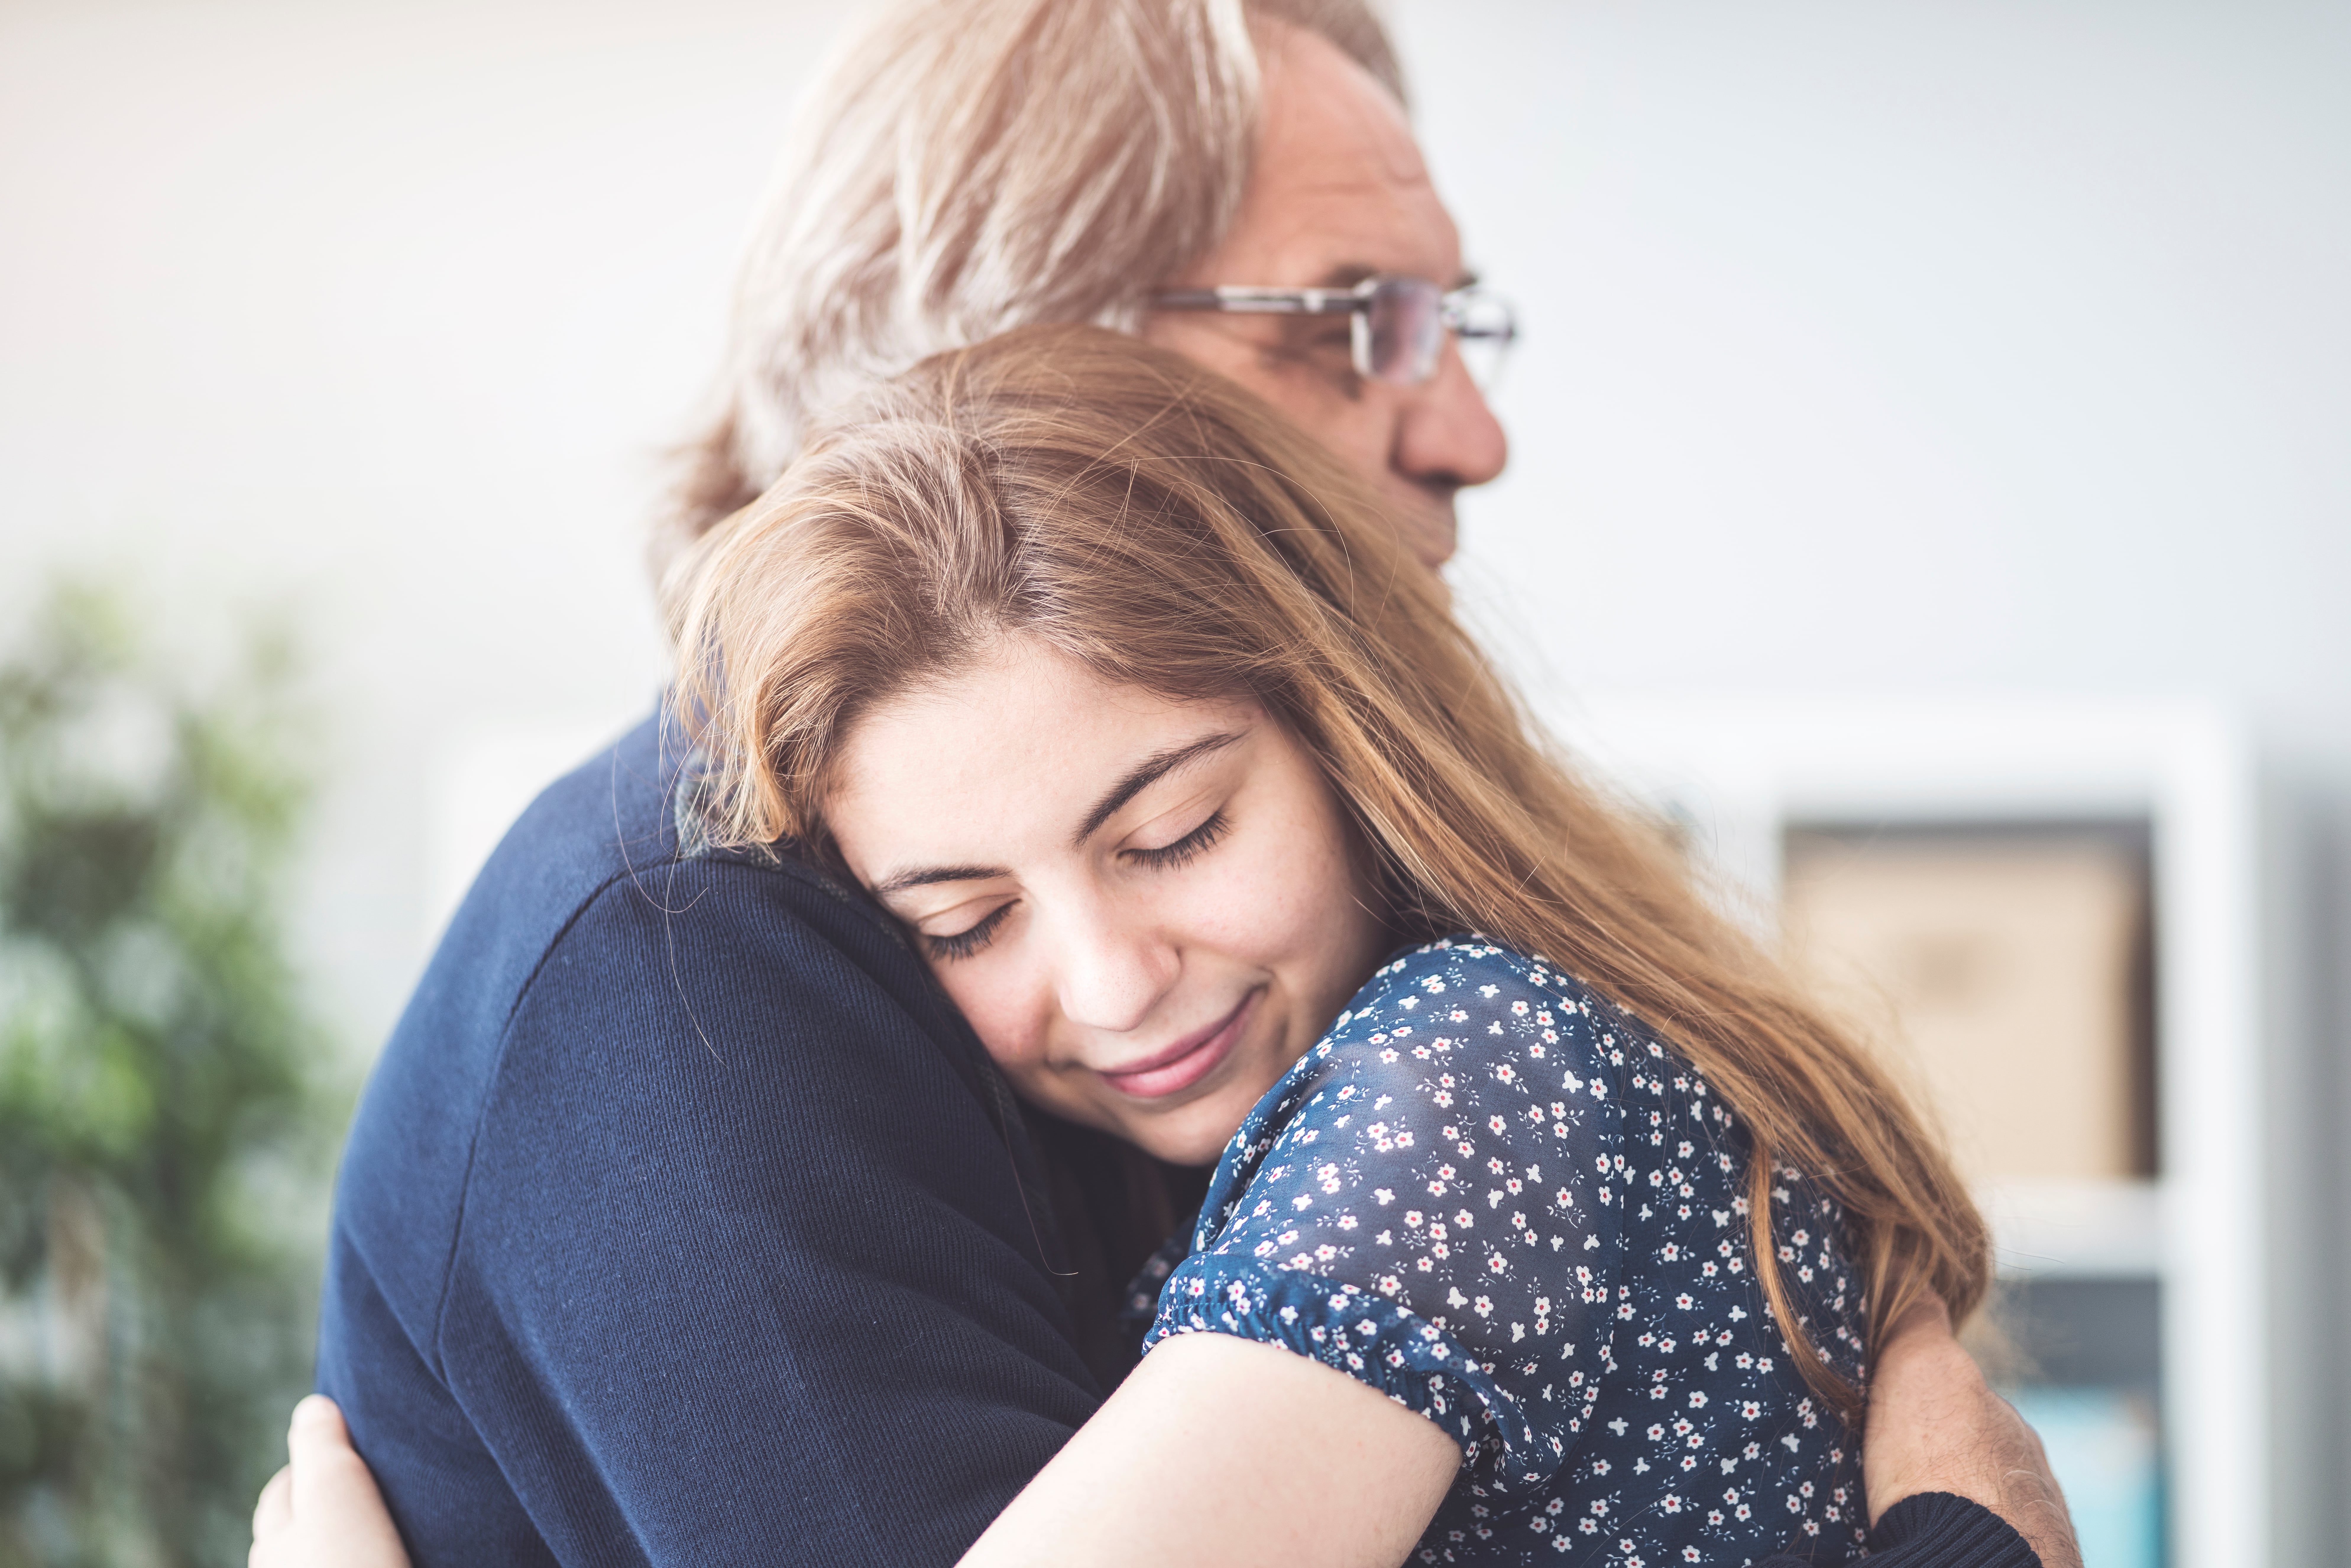 A young daughter hugging her father | Source: Shutterstock